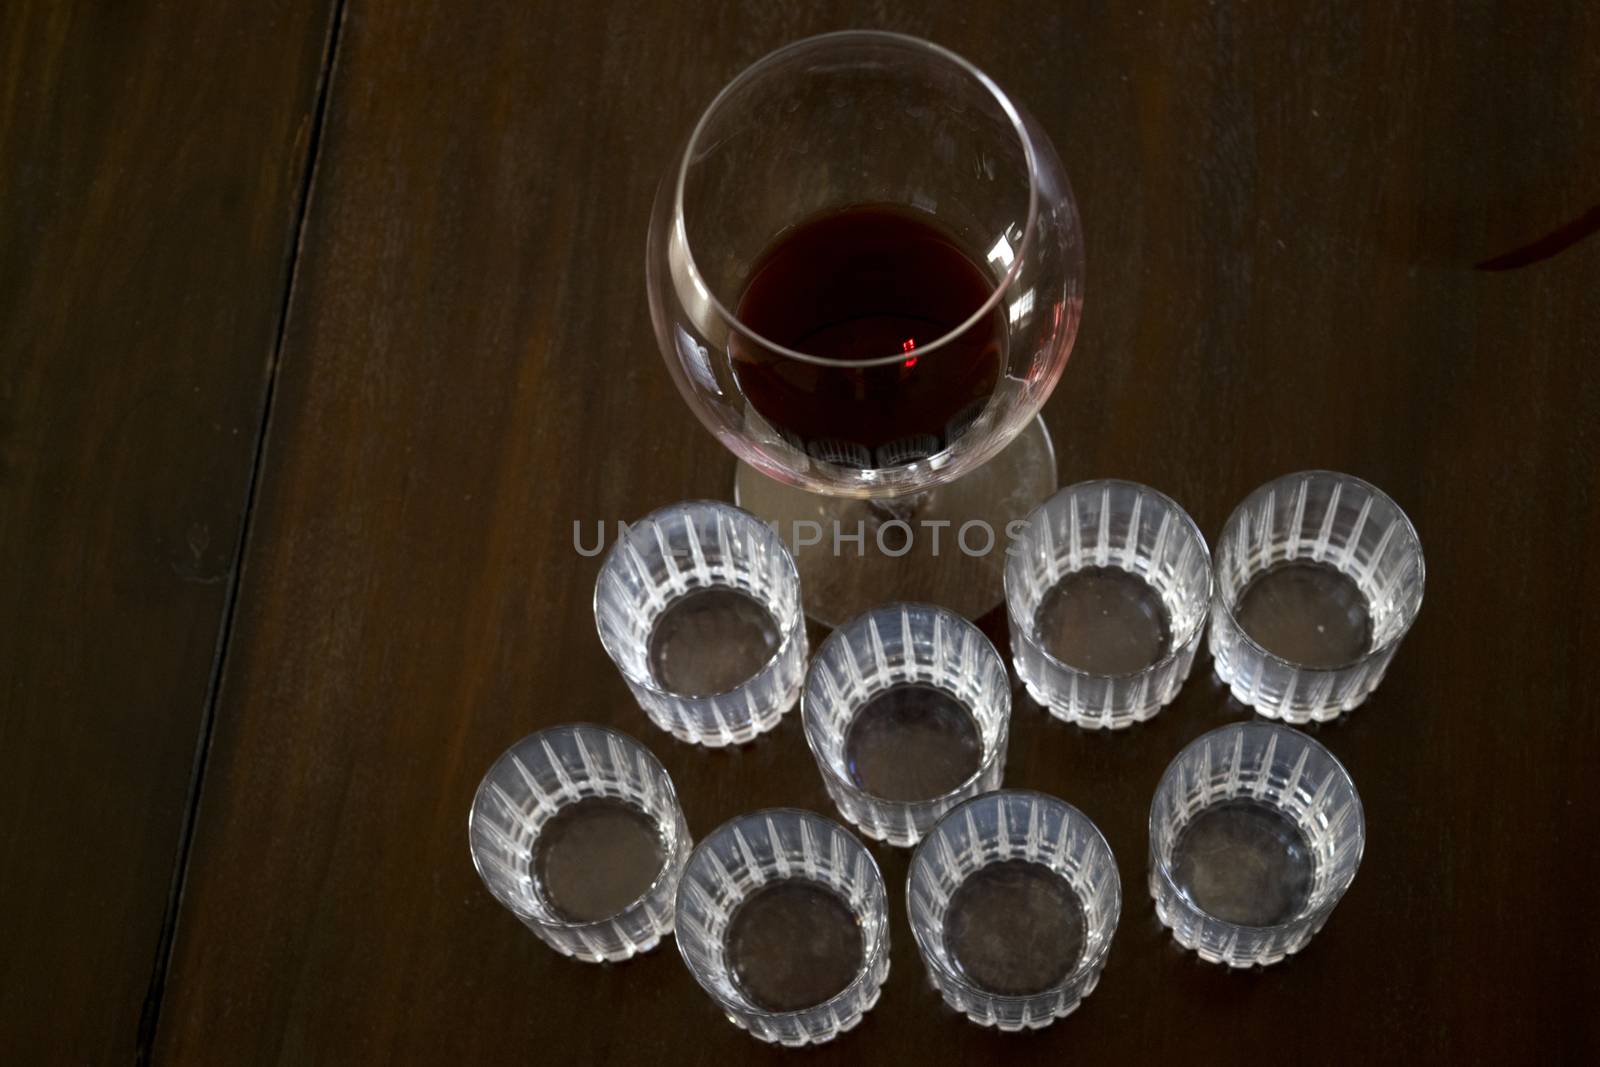 crystal ballon and liquor glasses in semi-darkness on a wooden dish